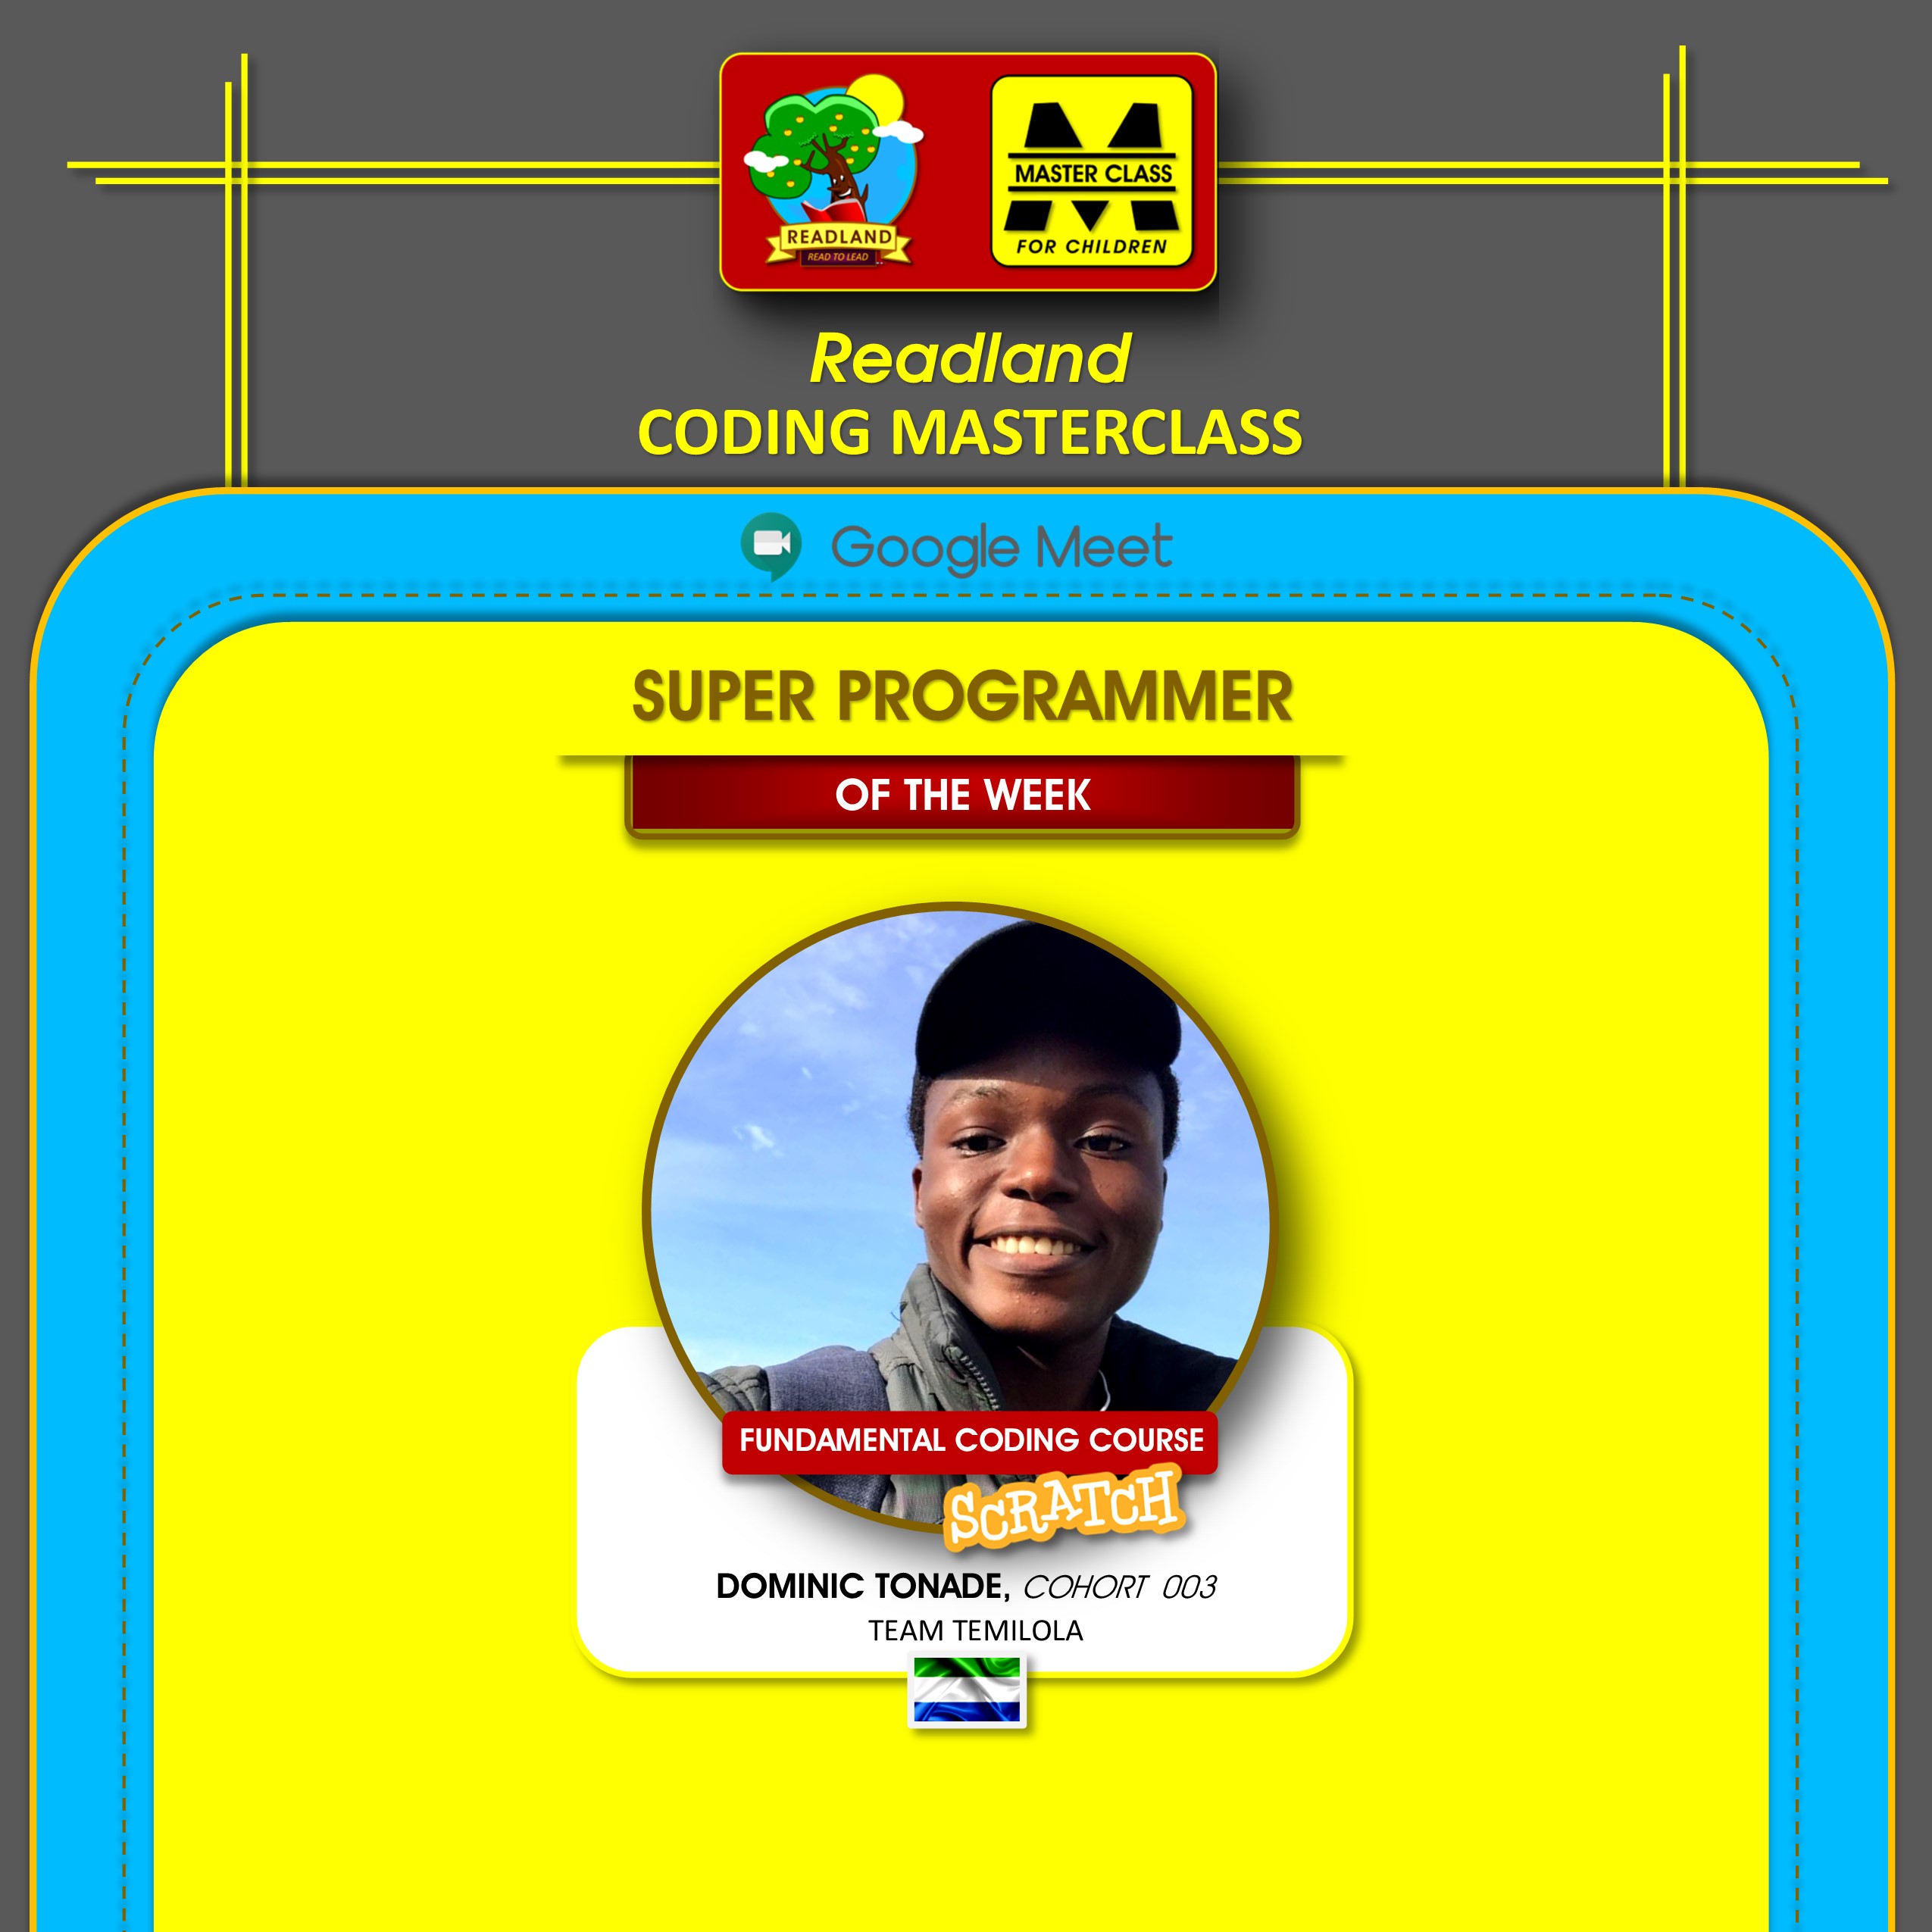 DOMINIC SUPER PROGRAMMER OF THE WEEK